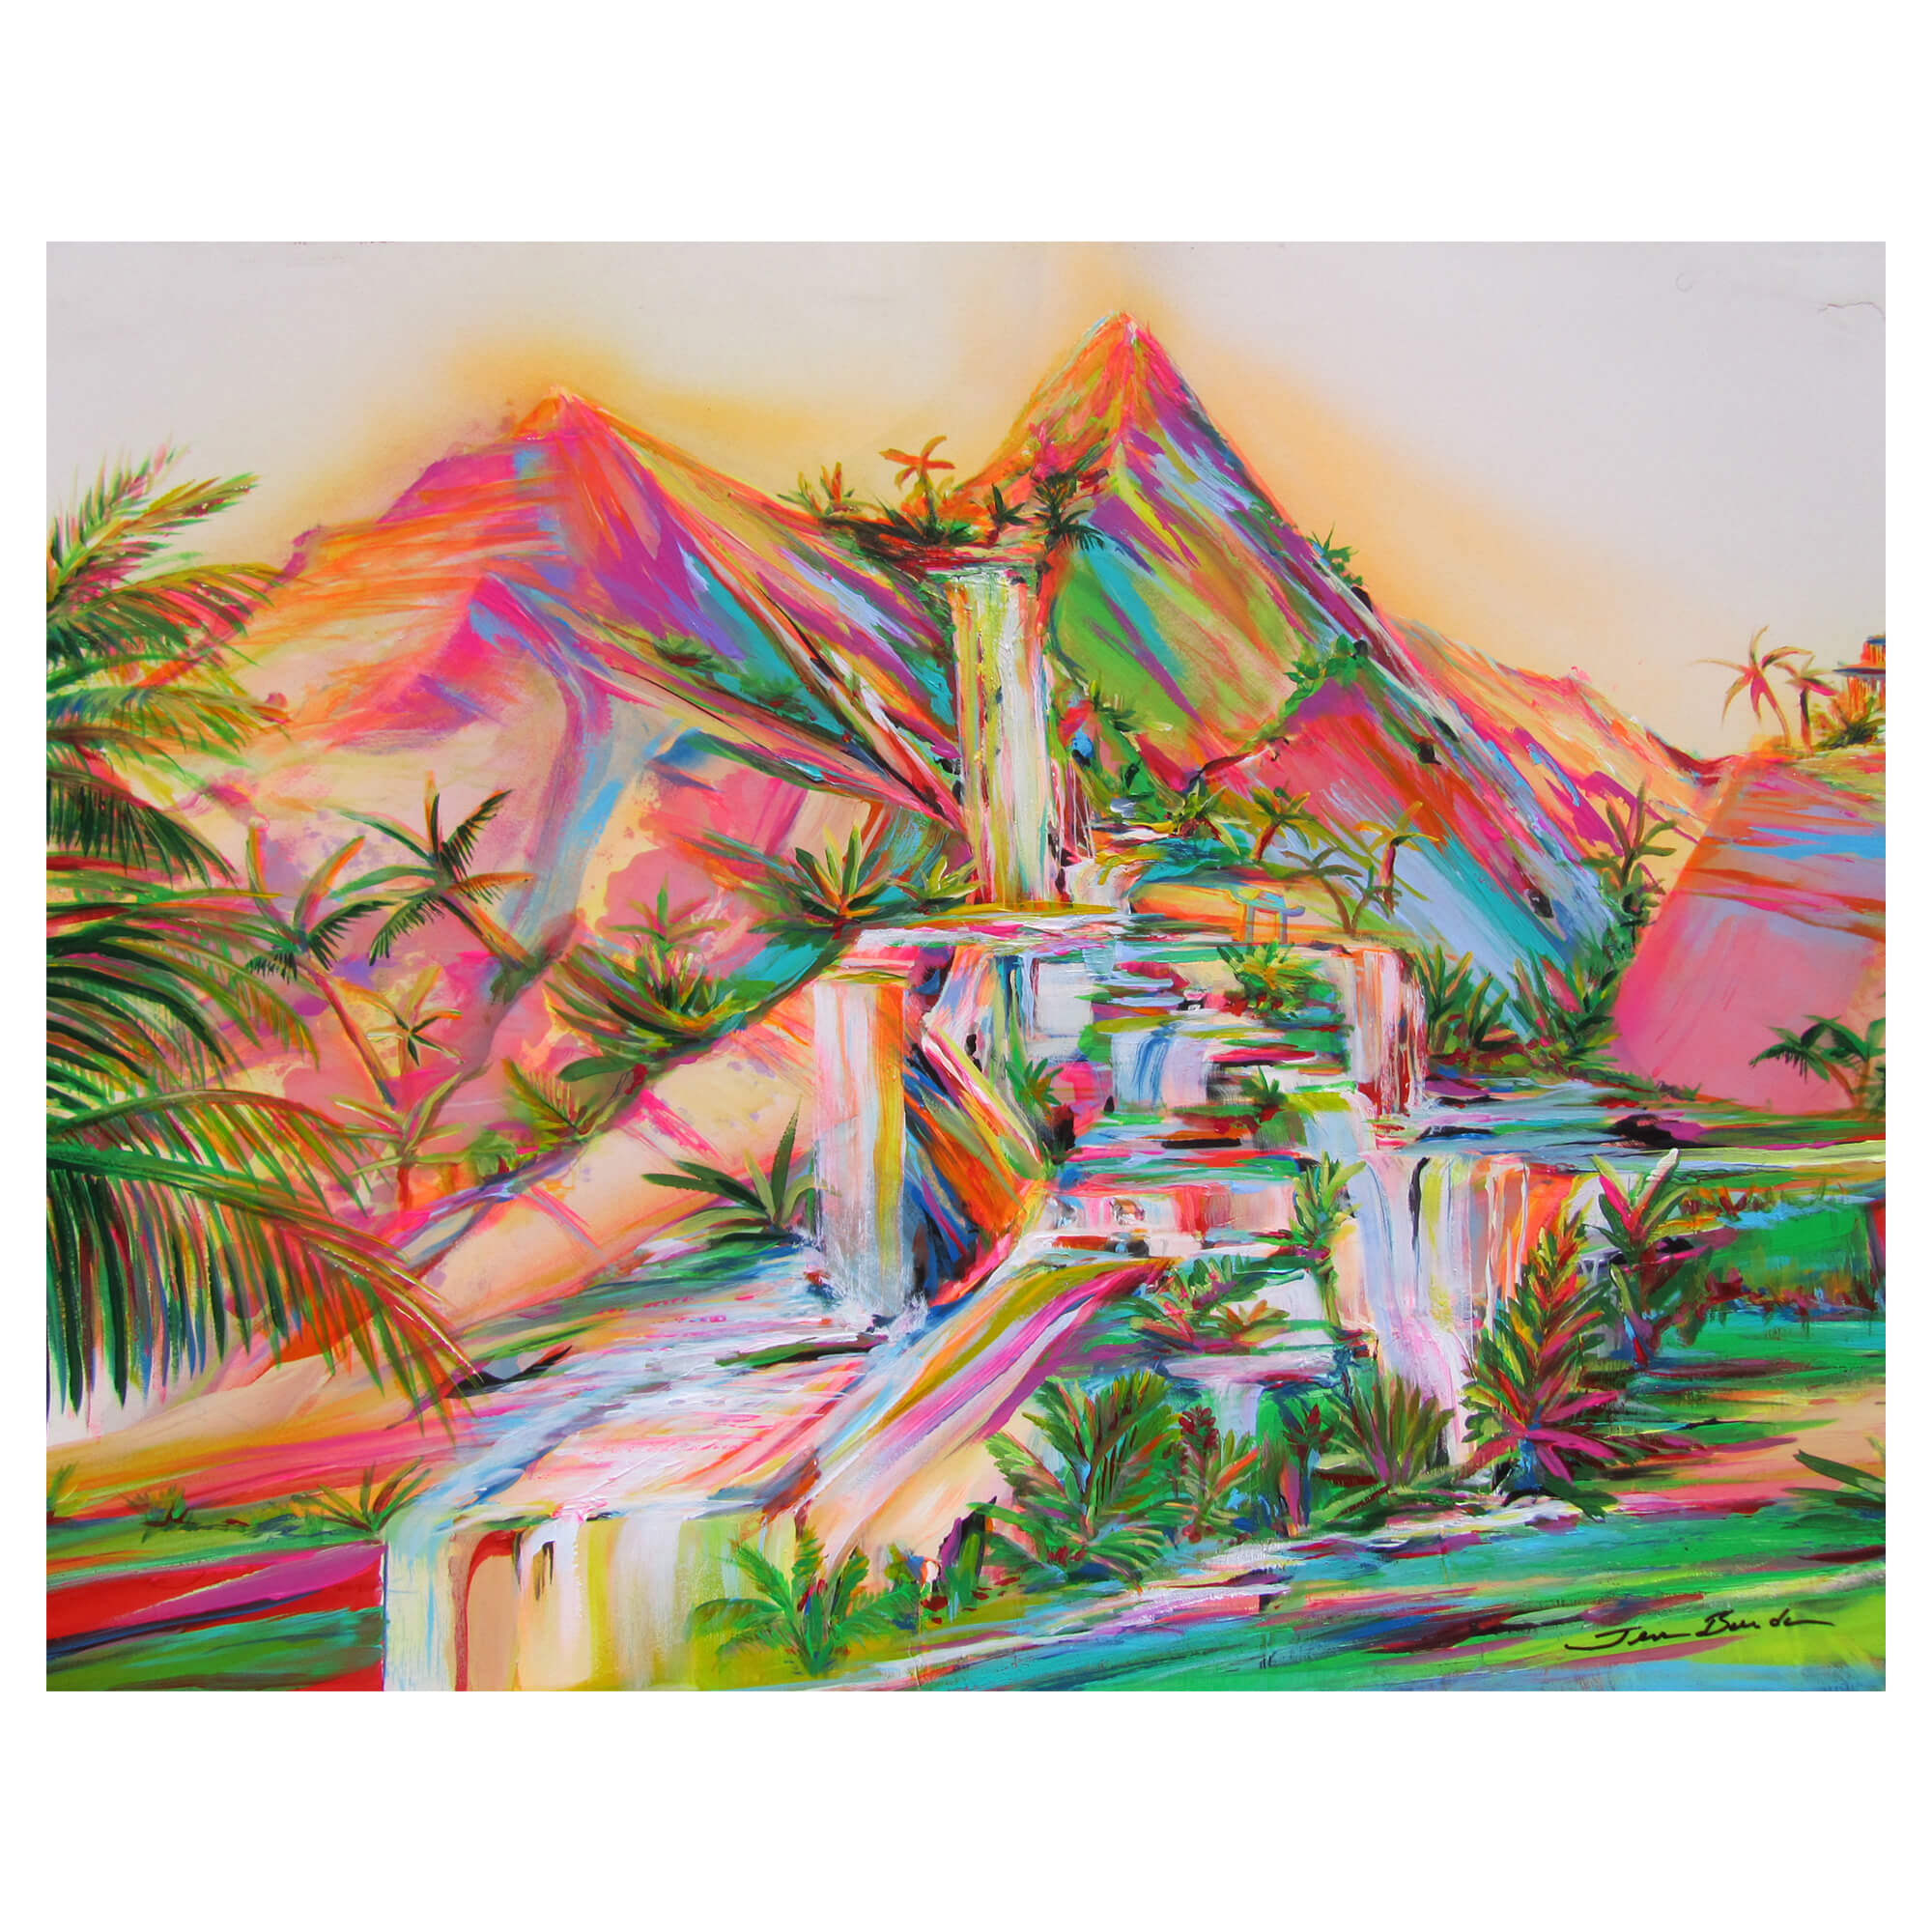 Mountain filled with waterfalls and tropical plants by Hawaii artist Jess Burda